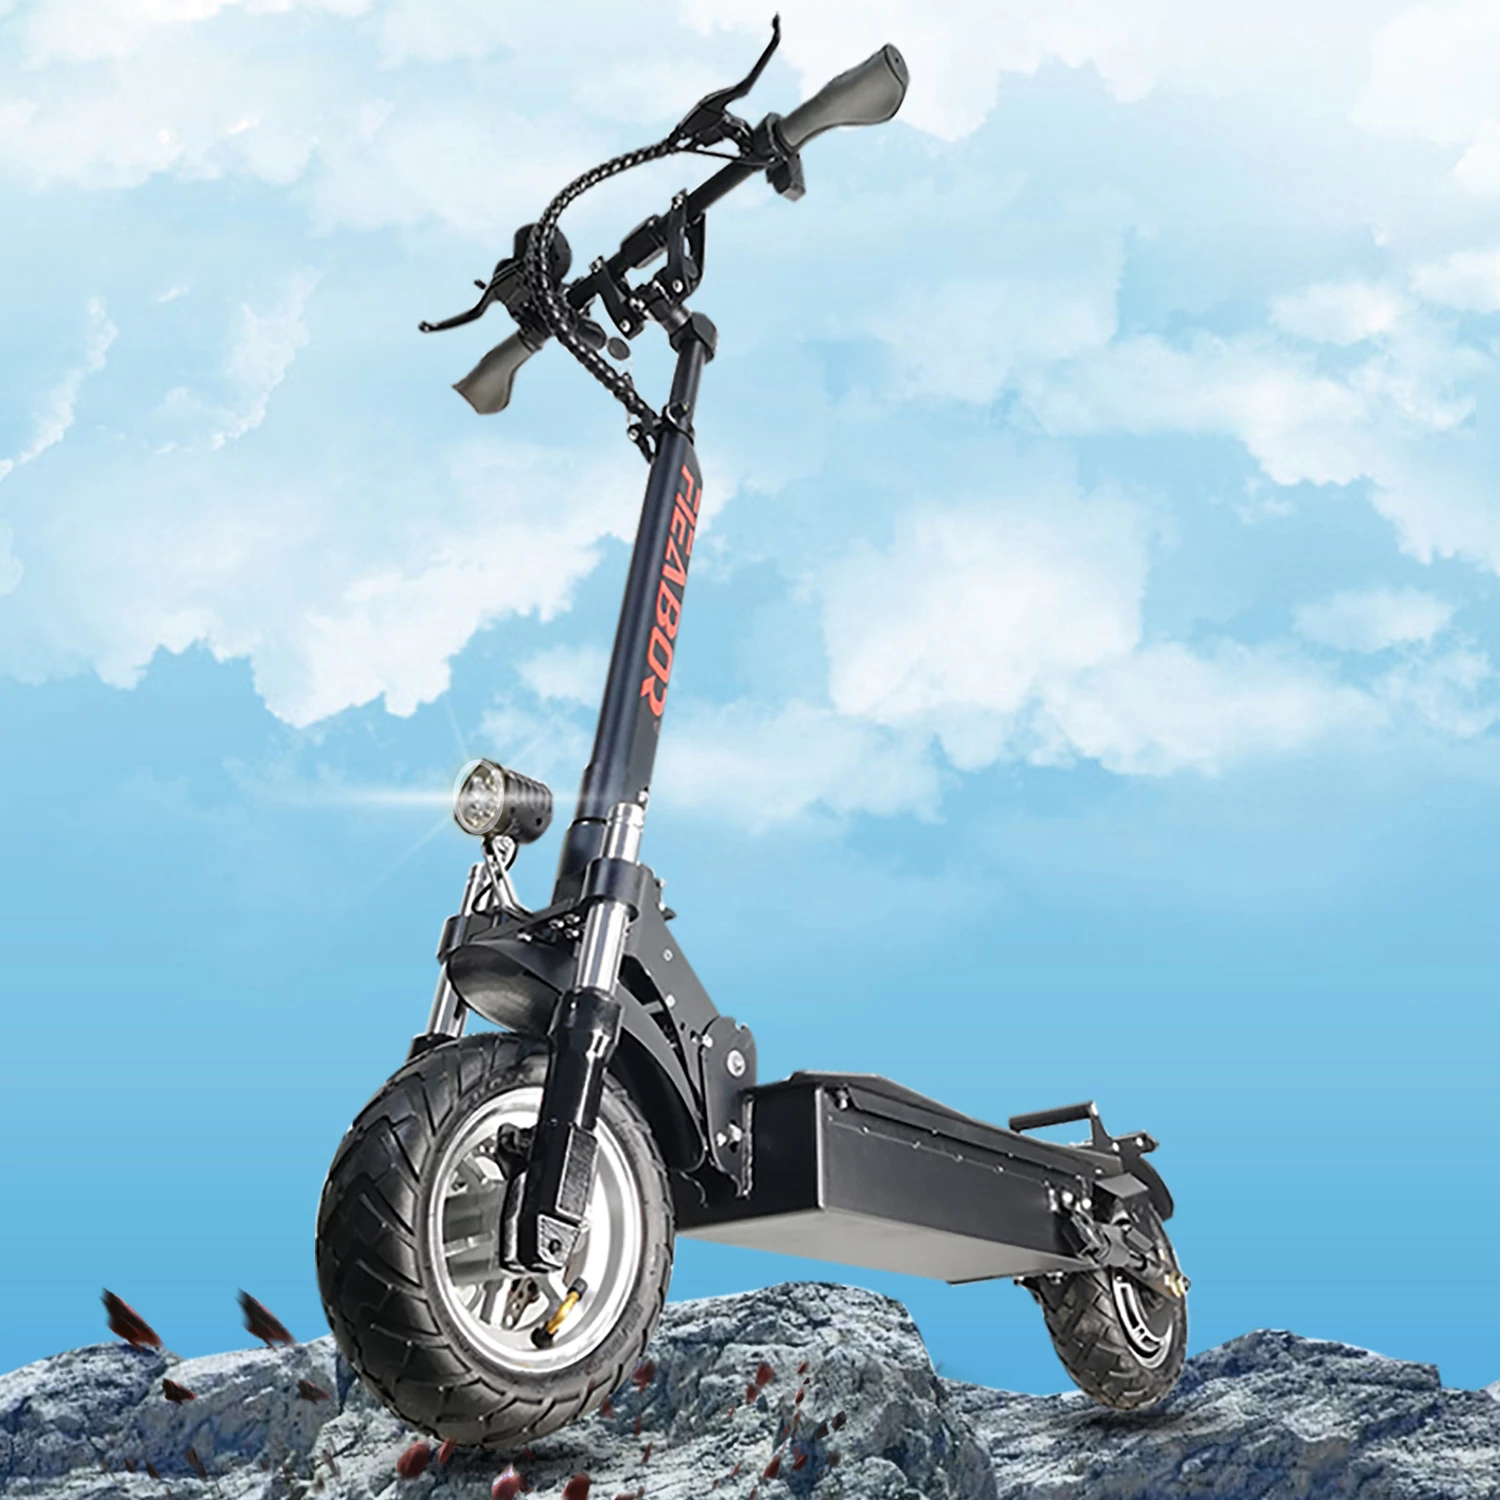 Find US DIRECT FIEABOR Q08P Oil Brake 2400W 60V 27Ah Dual Motor 10 5 Inch Electric Scooter 200Kg Max Load 60 80Km Range for Sale on Gipsybee.com with cryptocurrencies